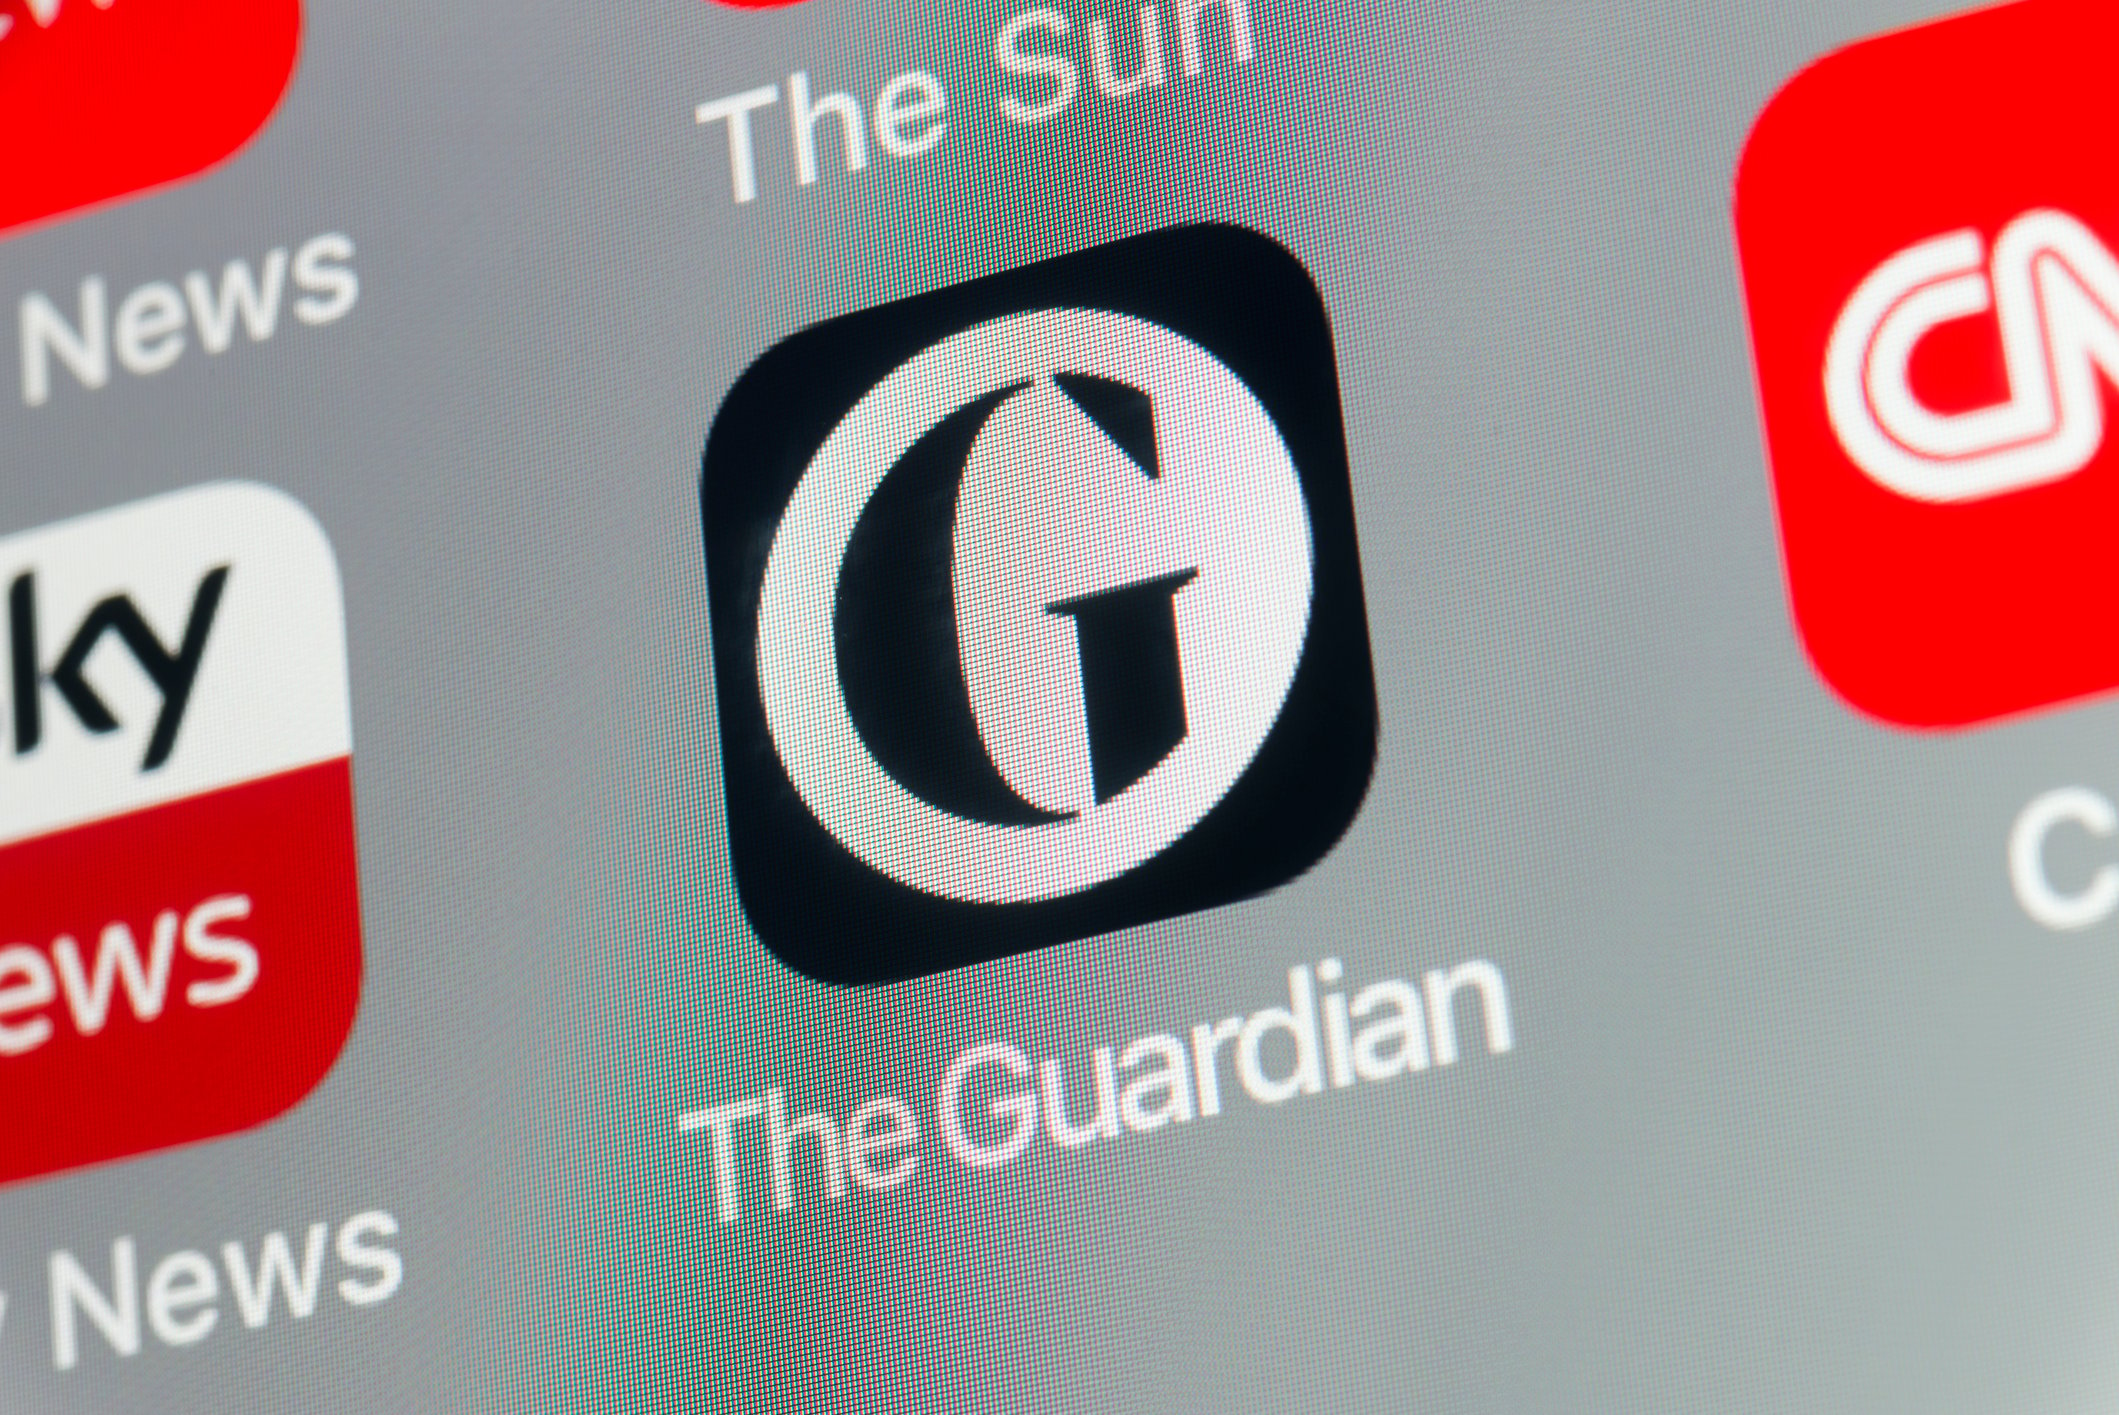 Personal data of Guardian staff breached in cyberattack